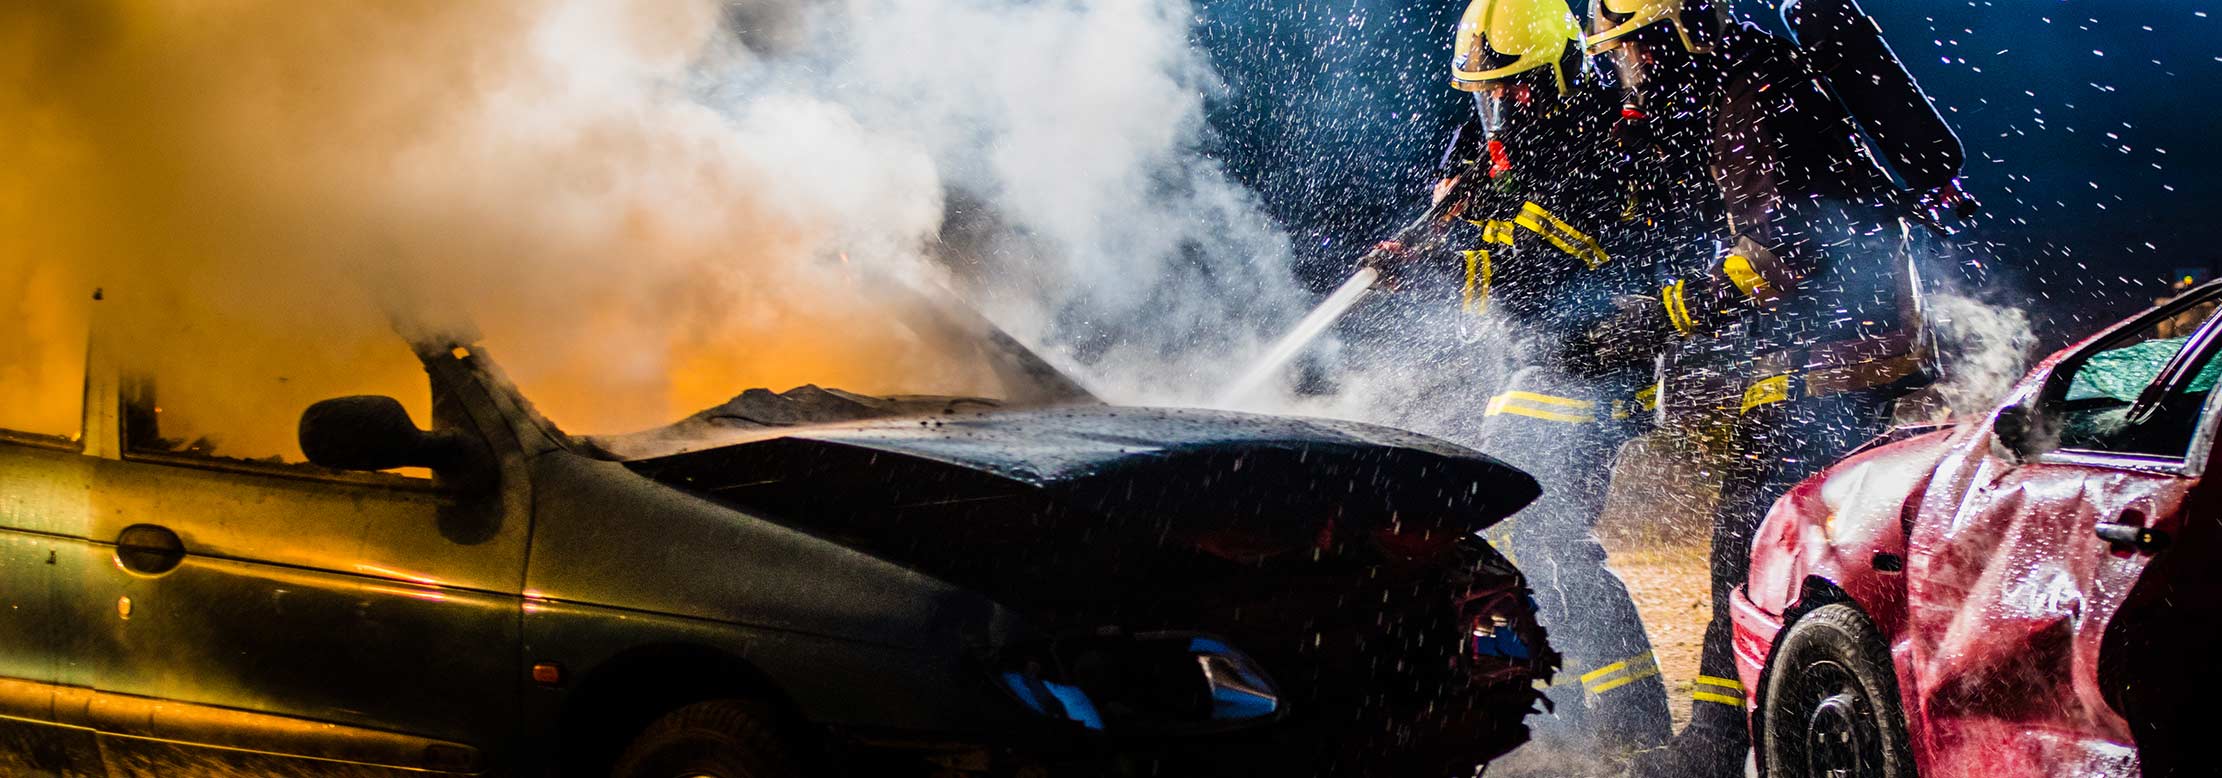 Firefighters attempt to stop a car from burning.